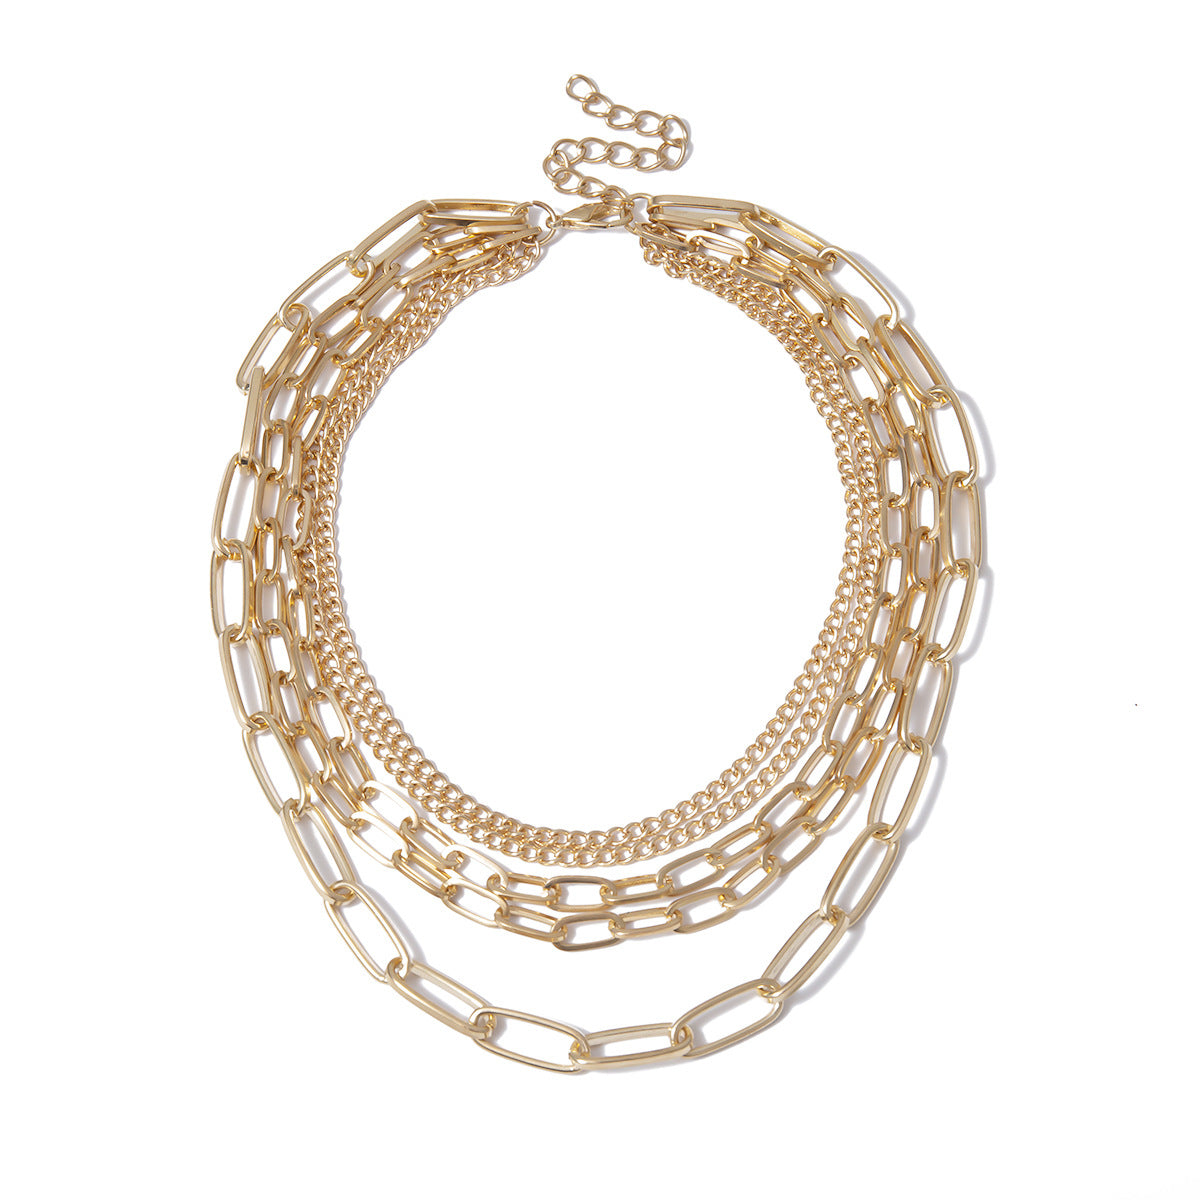 Vintage-Inspired Layered Necklace - Simple Metal Chain Bone Chain Jewelry for Women